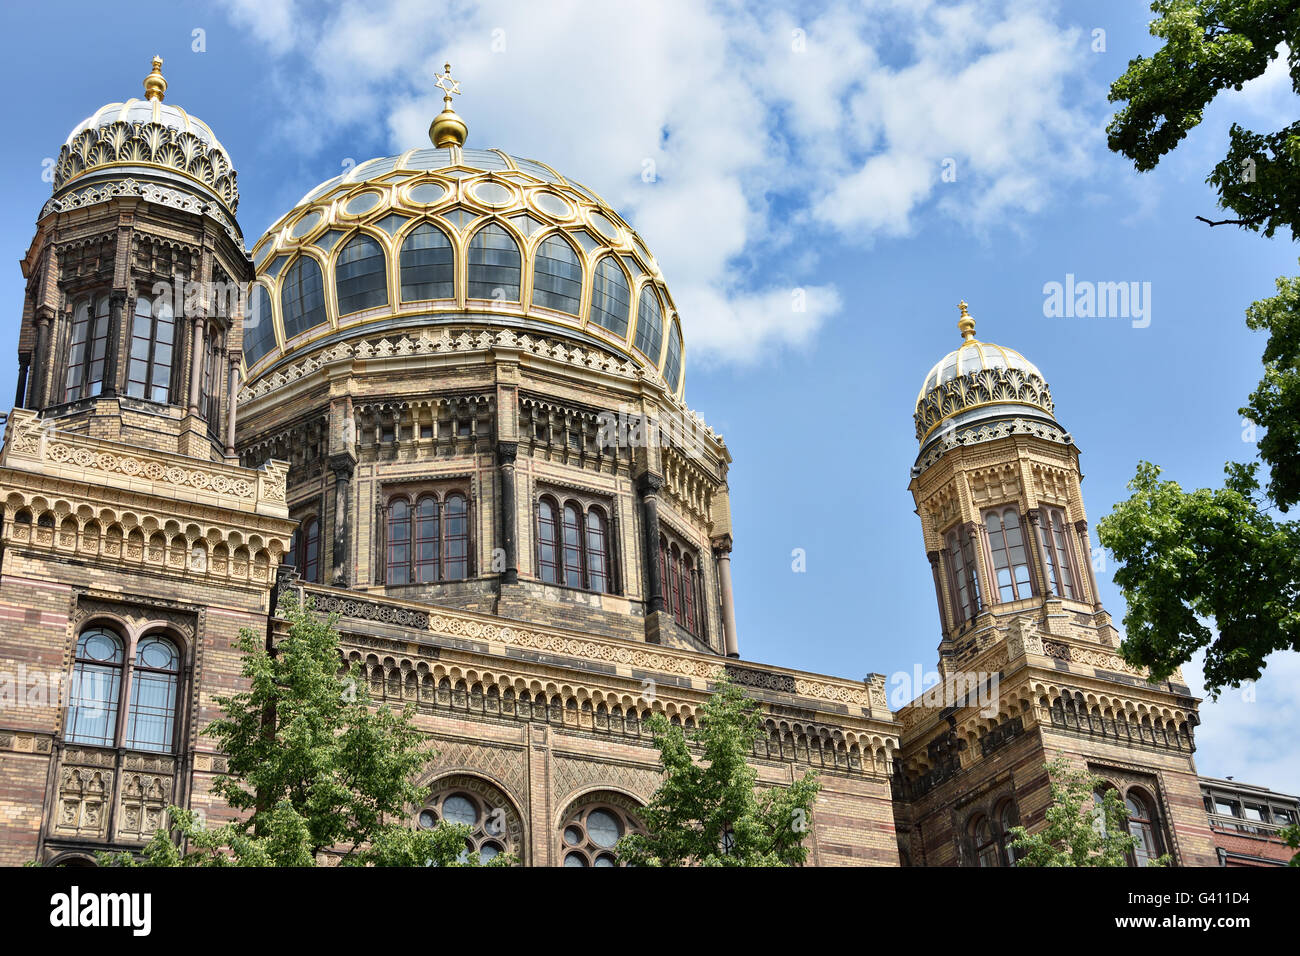 The Neue Synagoge (New Synagogue) 1859–1866 main synagogue of the Berlin Jewish community, on Oranienburger Straße. Because of its splendid eastern Moorish style and resemblance to the Alhambra. Oranienburger Strasse Mitte Berlin Germany Stock Photo